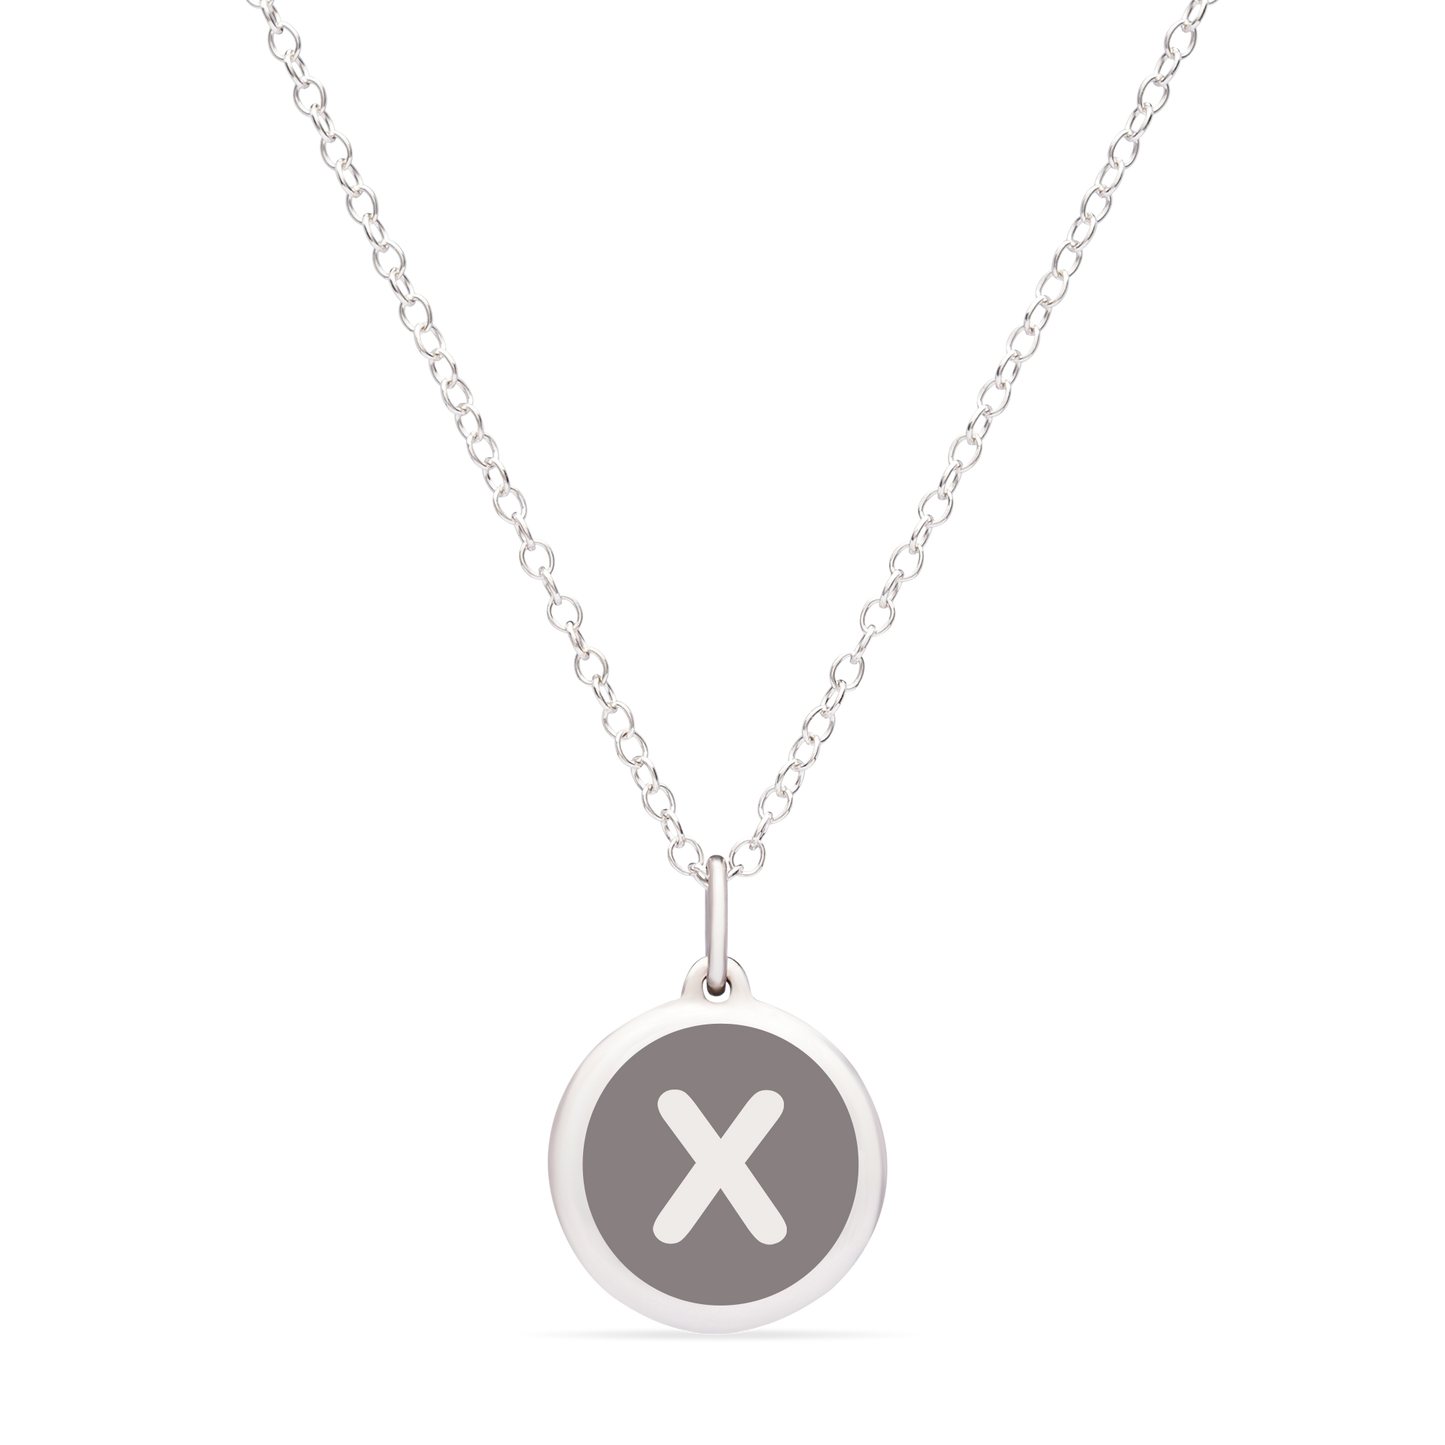 MINI INITIAL 'x' CHARM sterling silver with rhodium plate